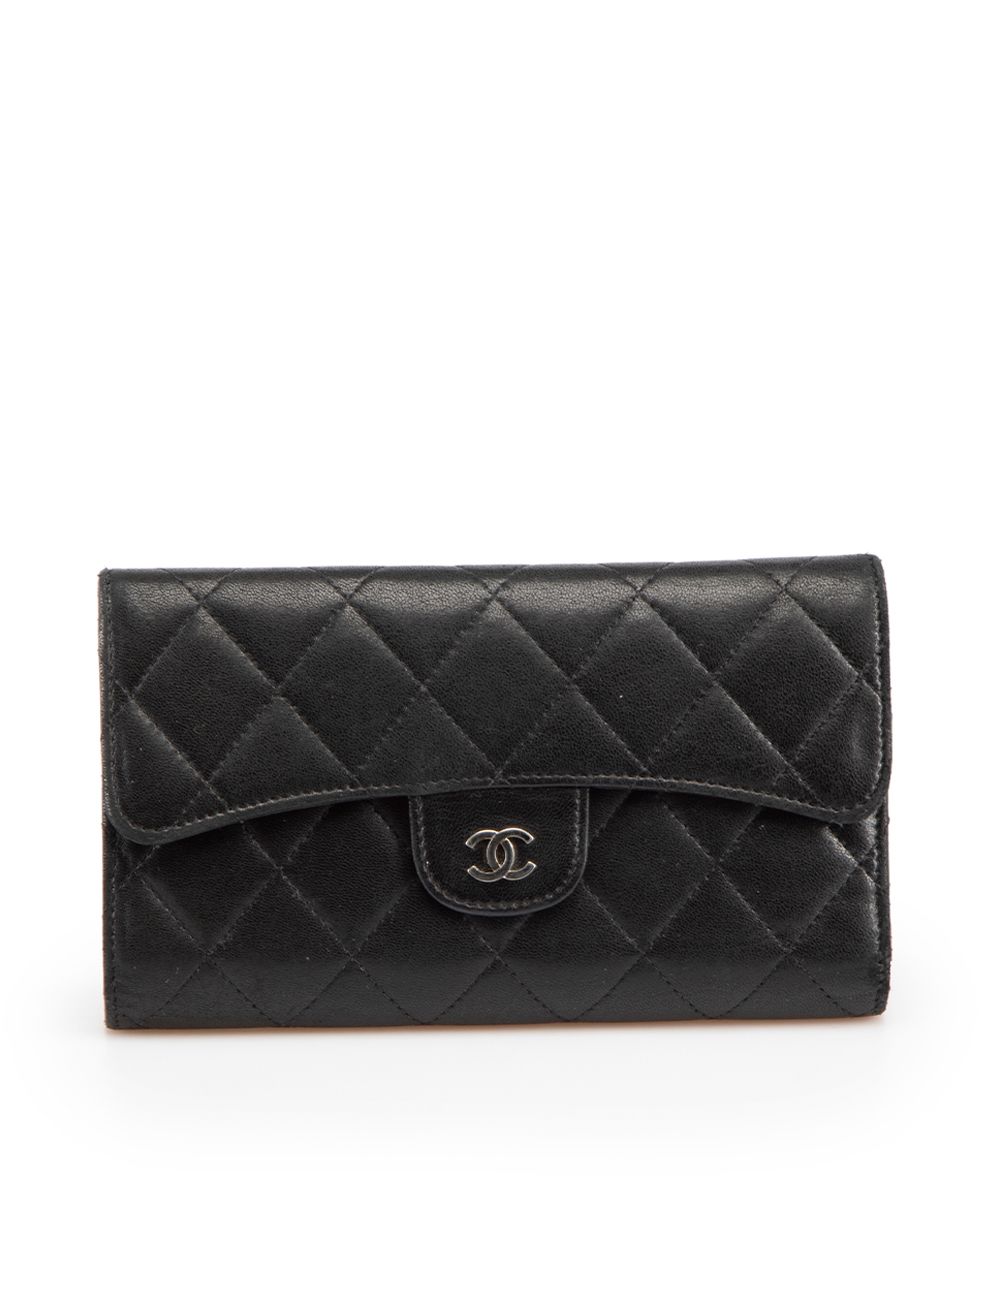 Chanel Black Lambskin Quilted Large Flap Wallet